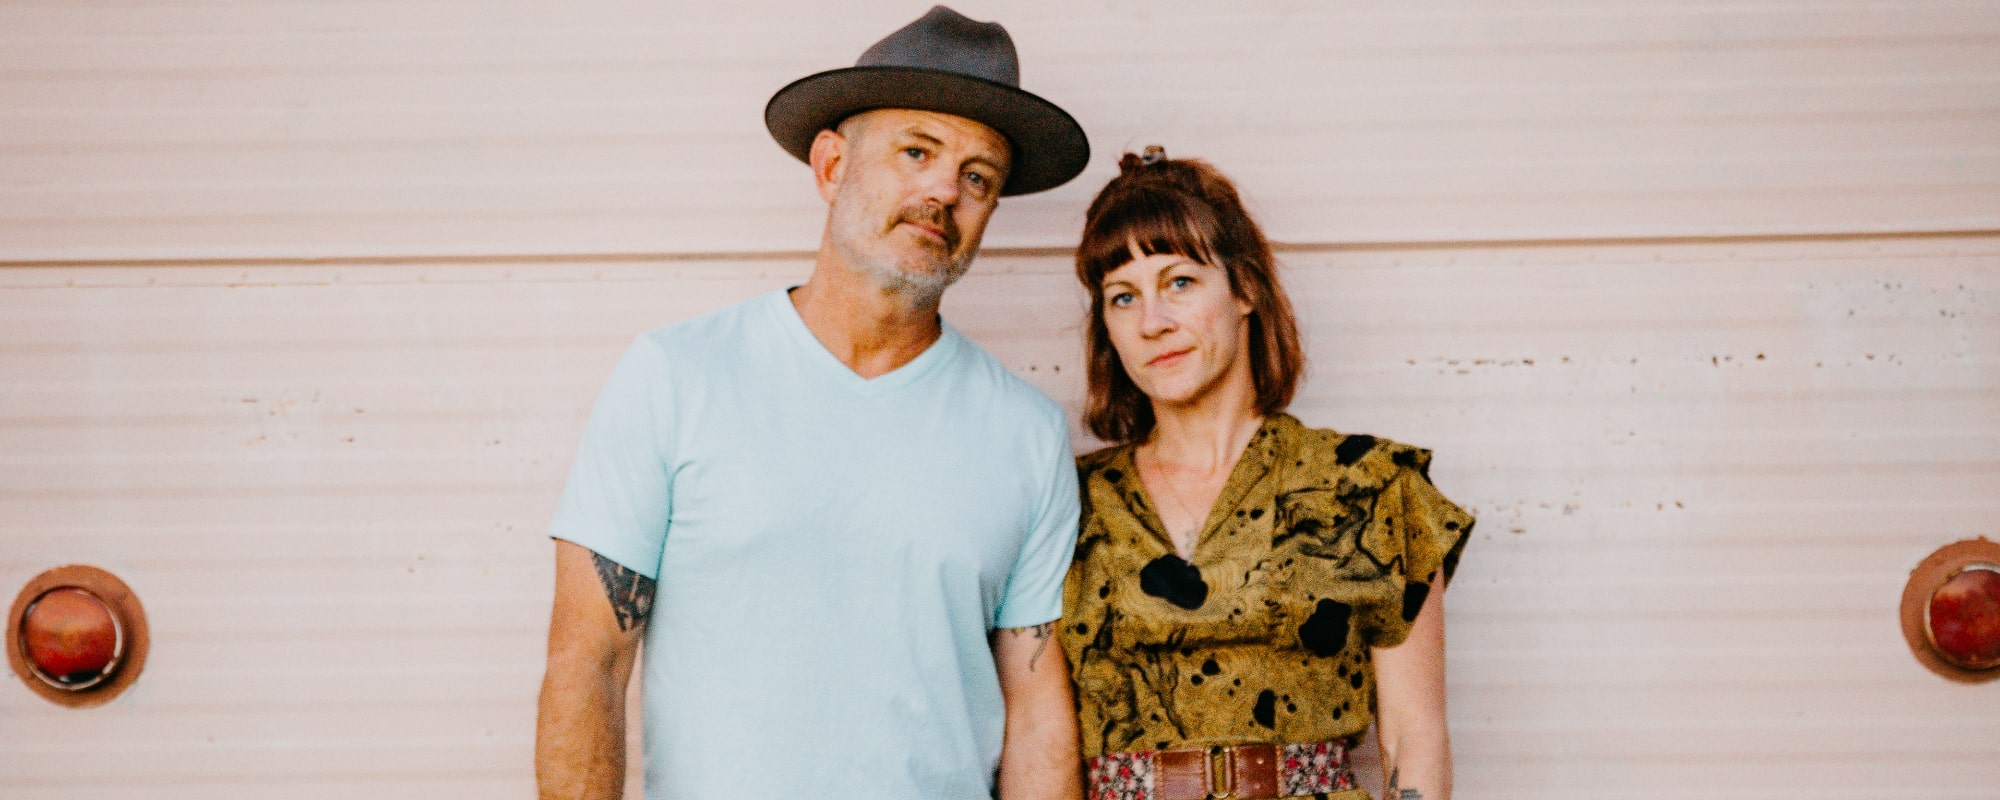 Red Dirt Pioneer Mike McClure and Longtime Partner Chrislyn Lawrence Form New Duo Crow and Gazelle, Release Debut Single